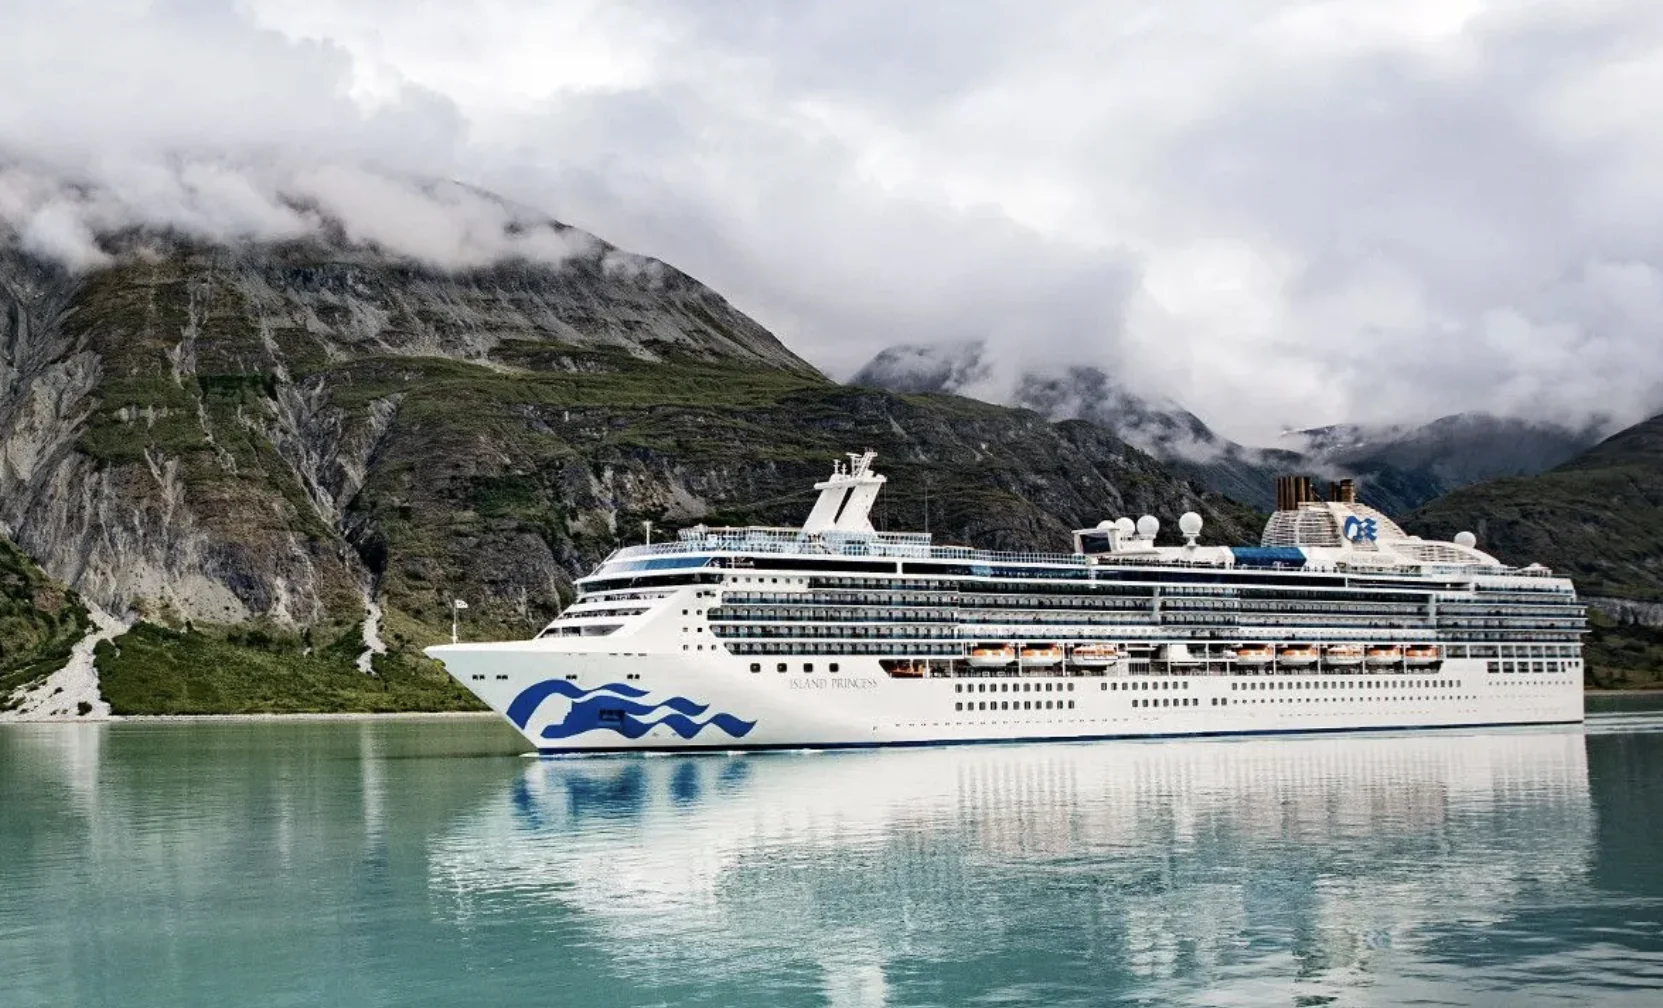 A Princess ship on the water in Alaska floating in front of mountains